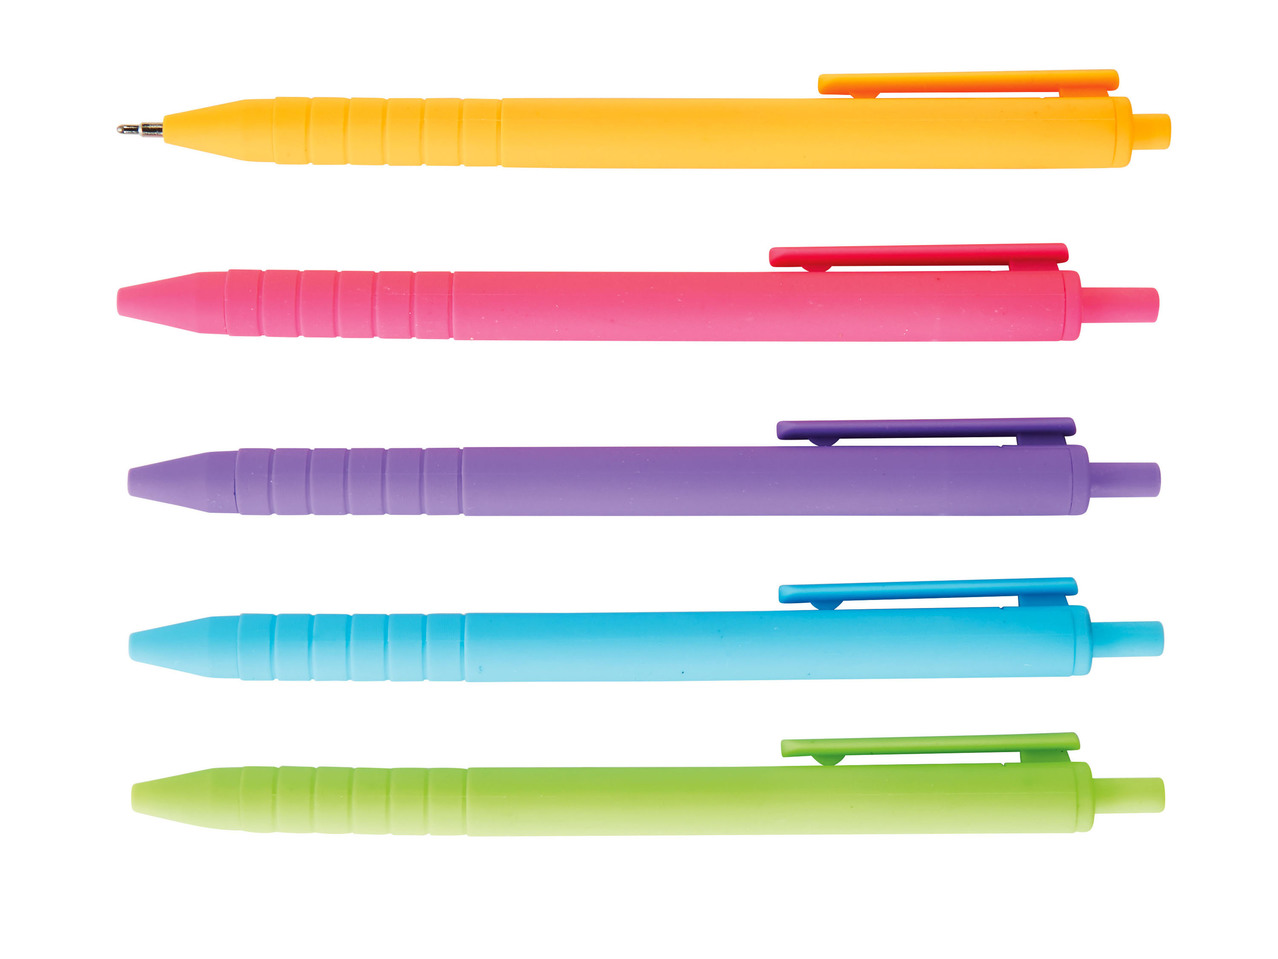 "Neon" Stationery Items